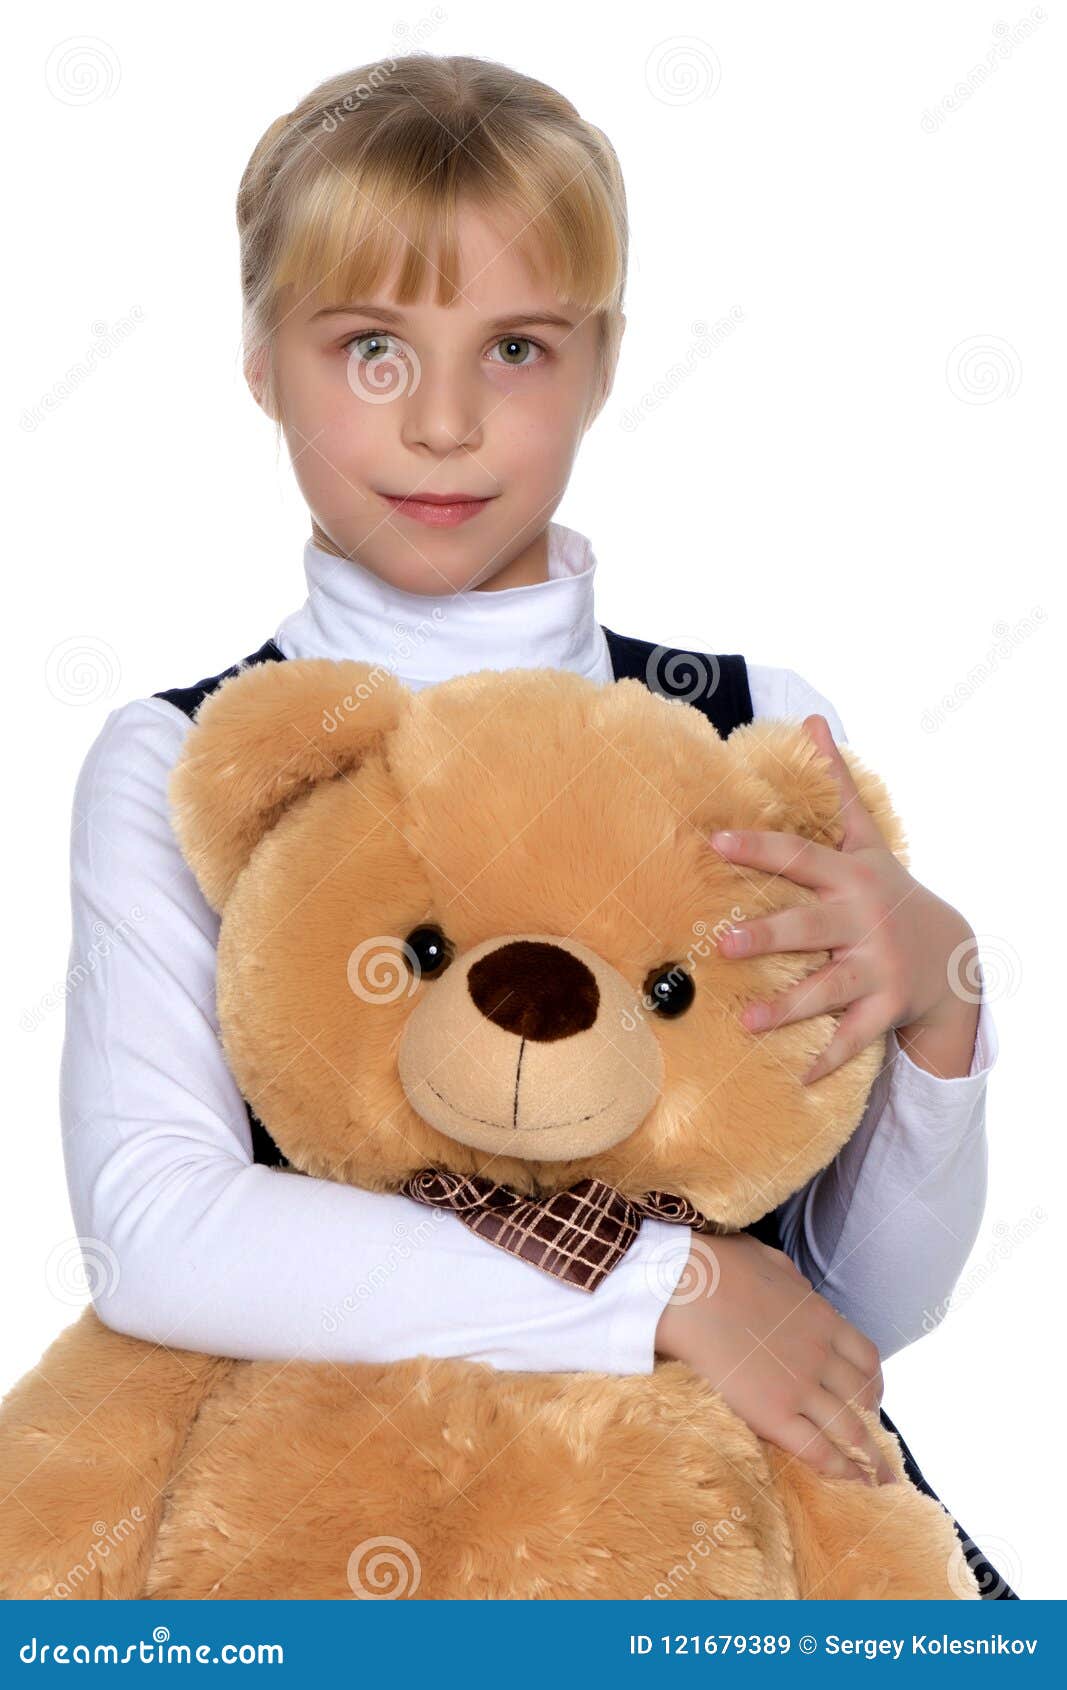 Little Girl with Teddy Bear Stock Image - Image of care, play: 121679389